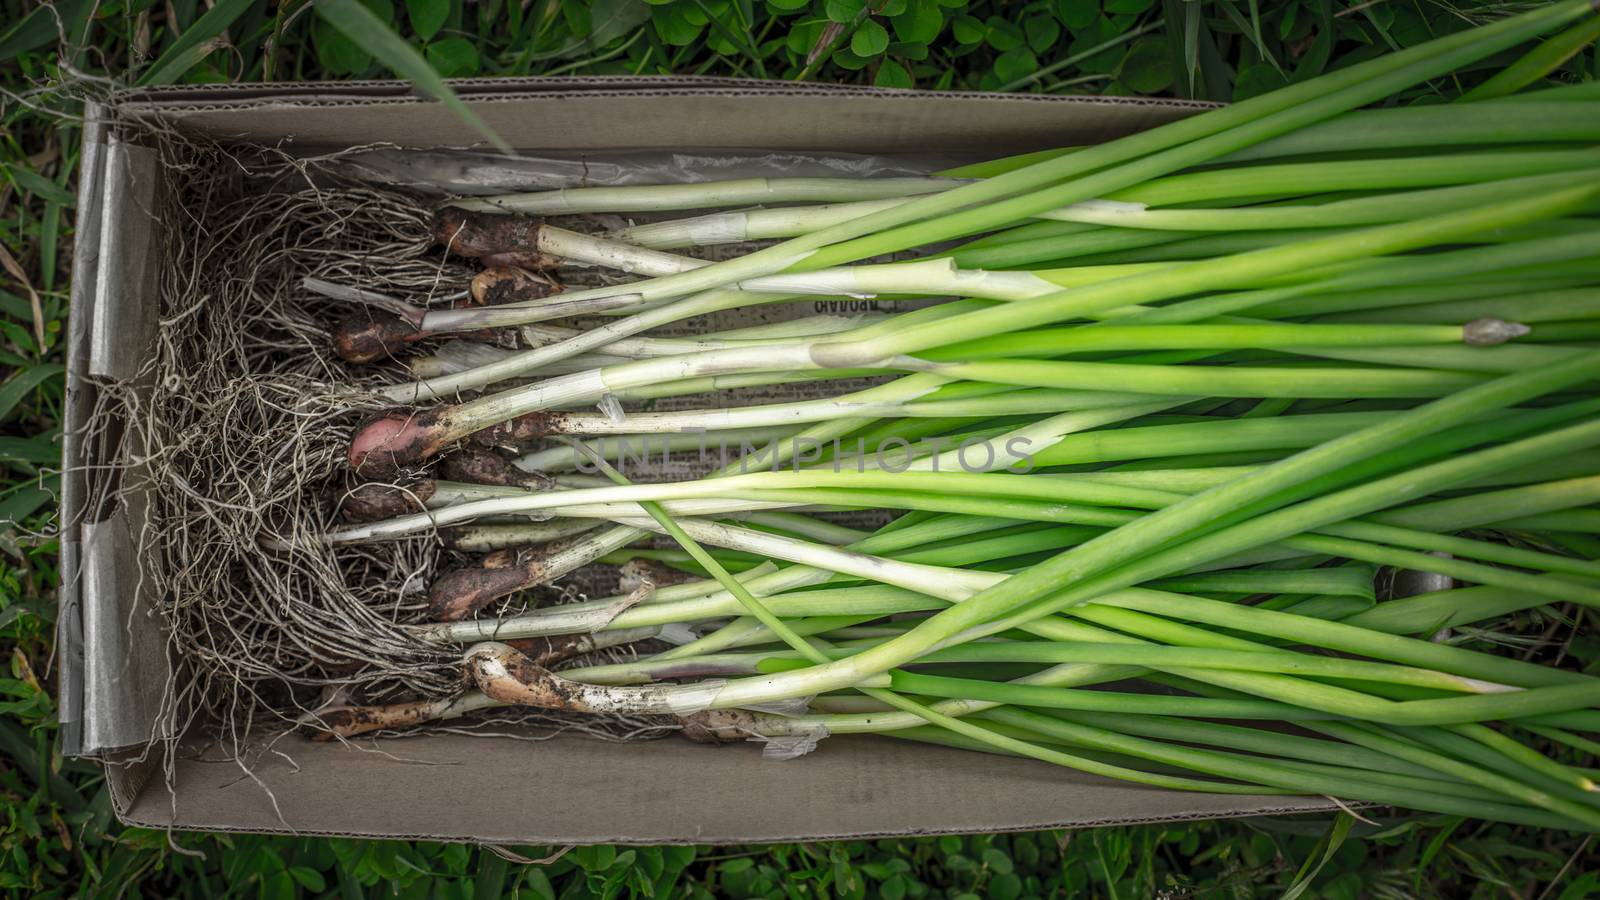 Green onions in the box